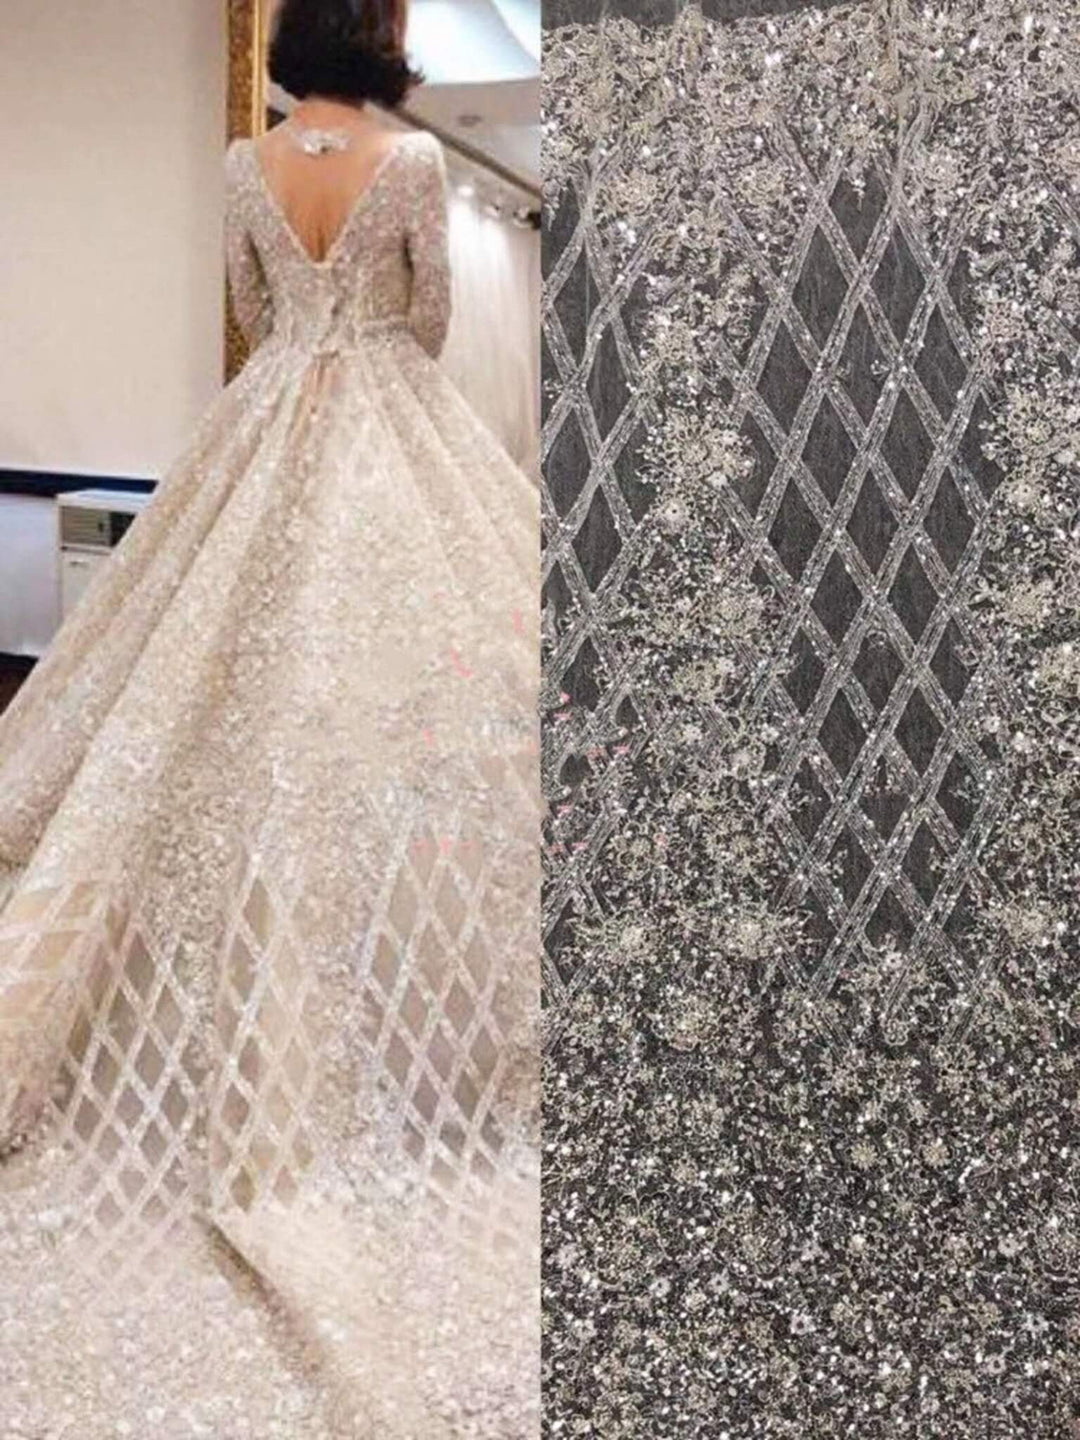 5 YARDS / Charlyne Beautiful Floral White Beige Beaded Sequin Embroidery Glitter on Light Tulle Mesh LaceParty Prom Bridal Dress Fabric